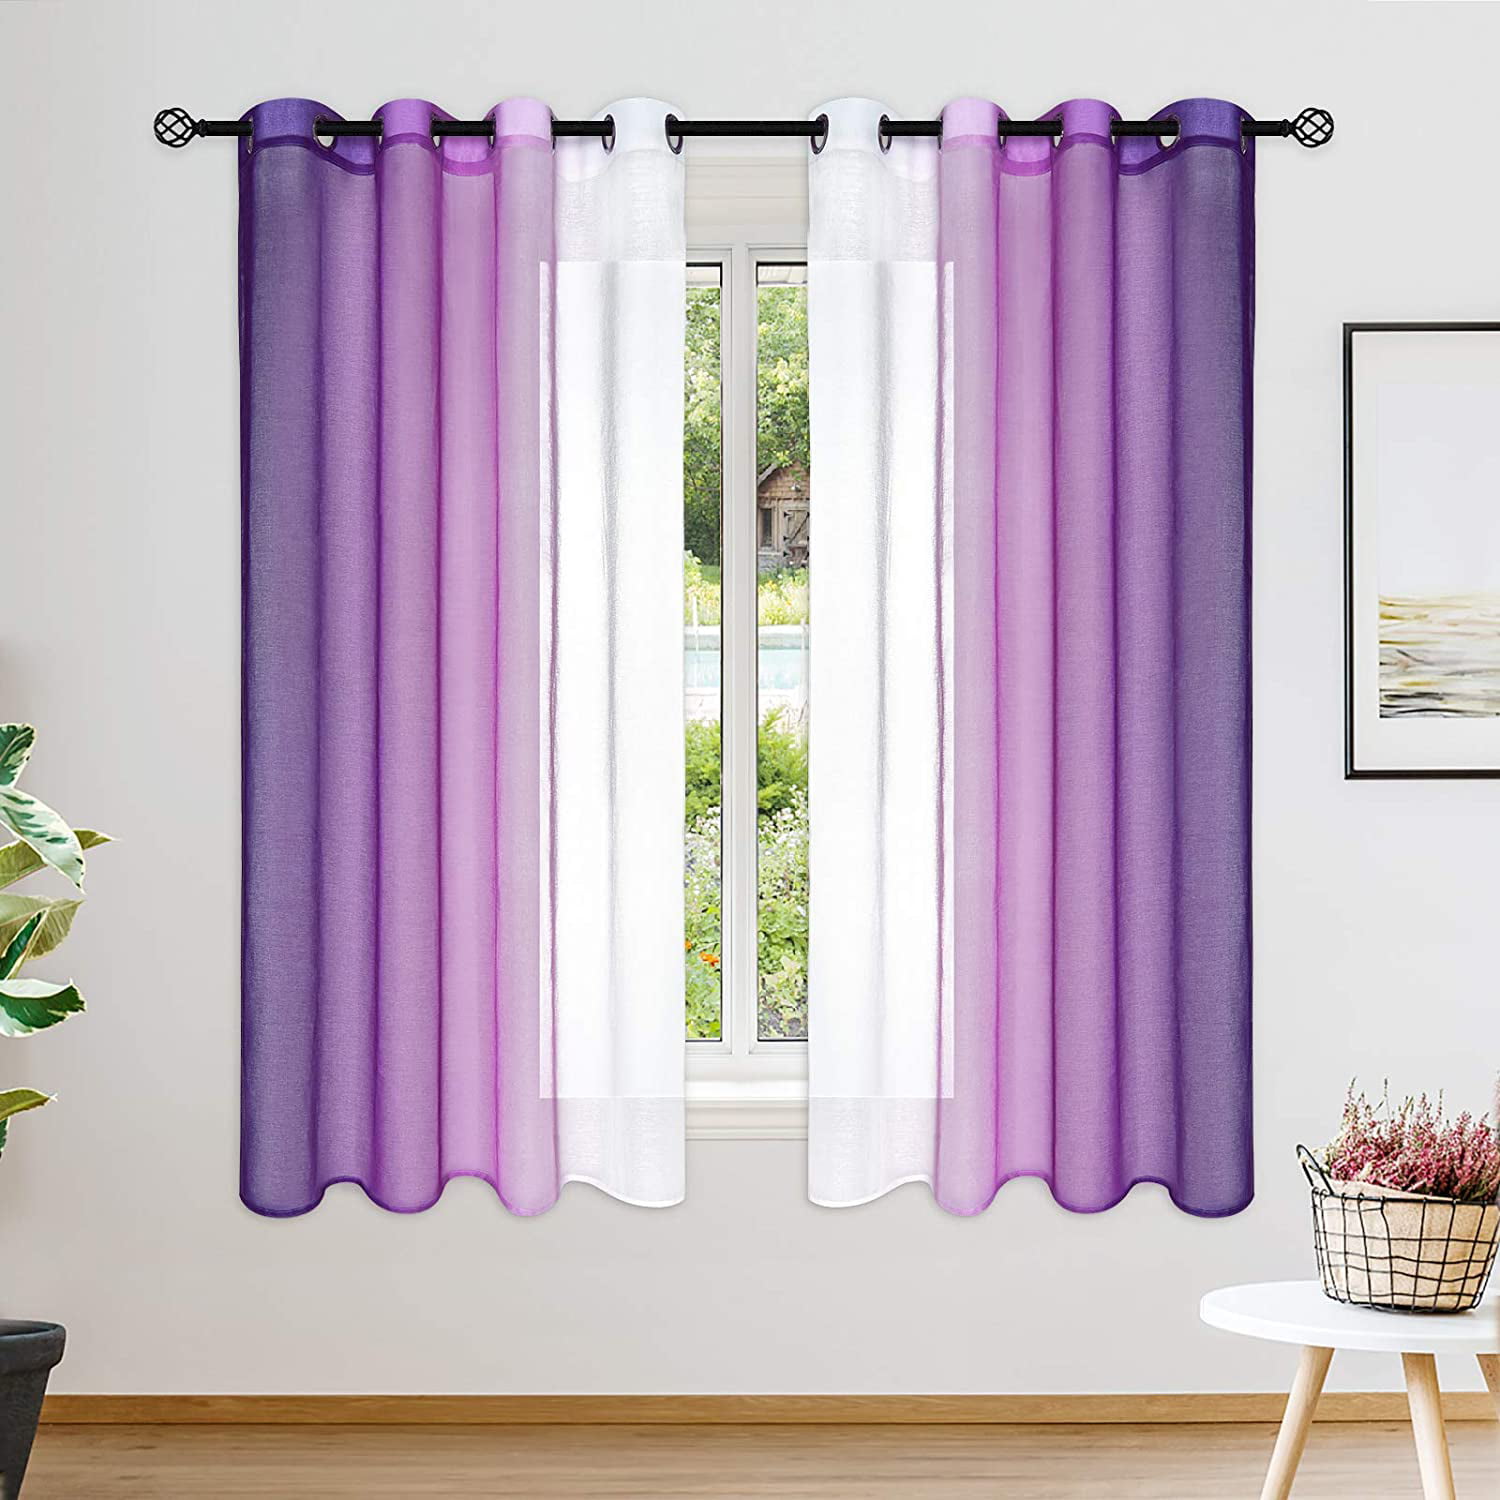 Details about   White Yarn Curtain Window Tulle Curtains Modern Window Treatments Voile Curtain 